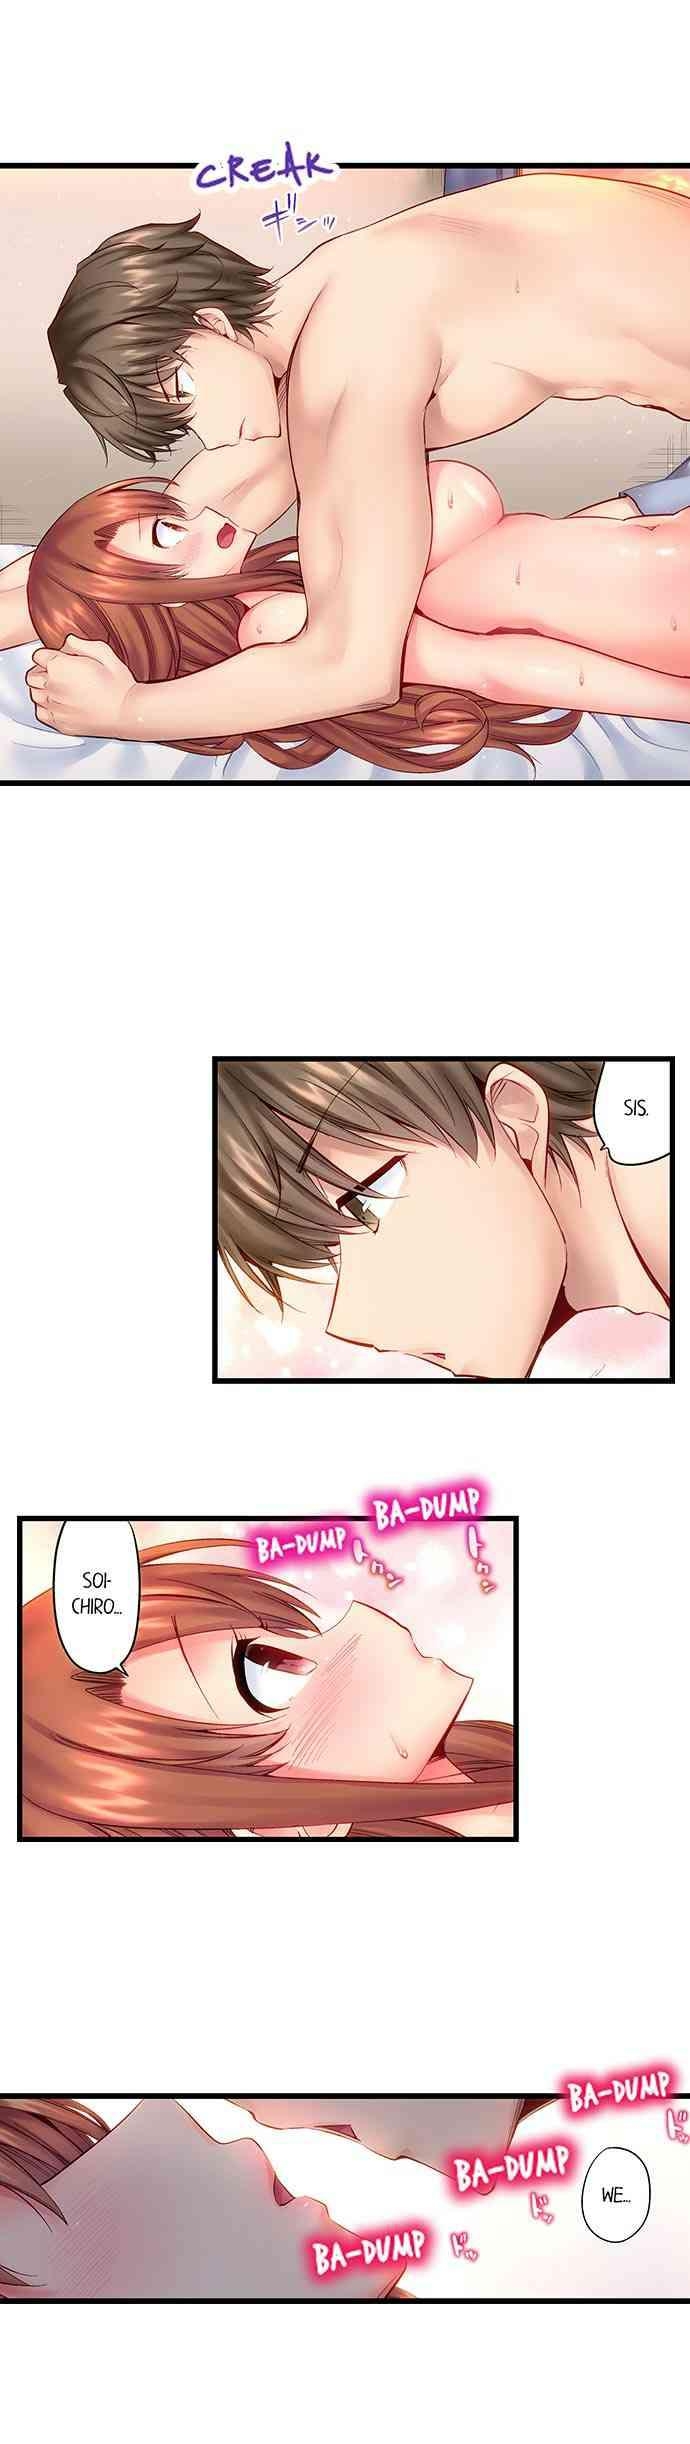 [Yuuki HB] "Hypnotized" Sex with My Brother Ch.21/? [English] [Ongoing] 32